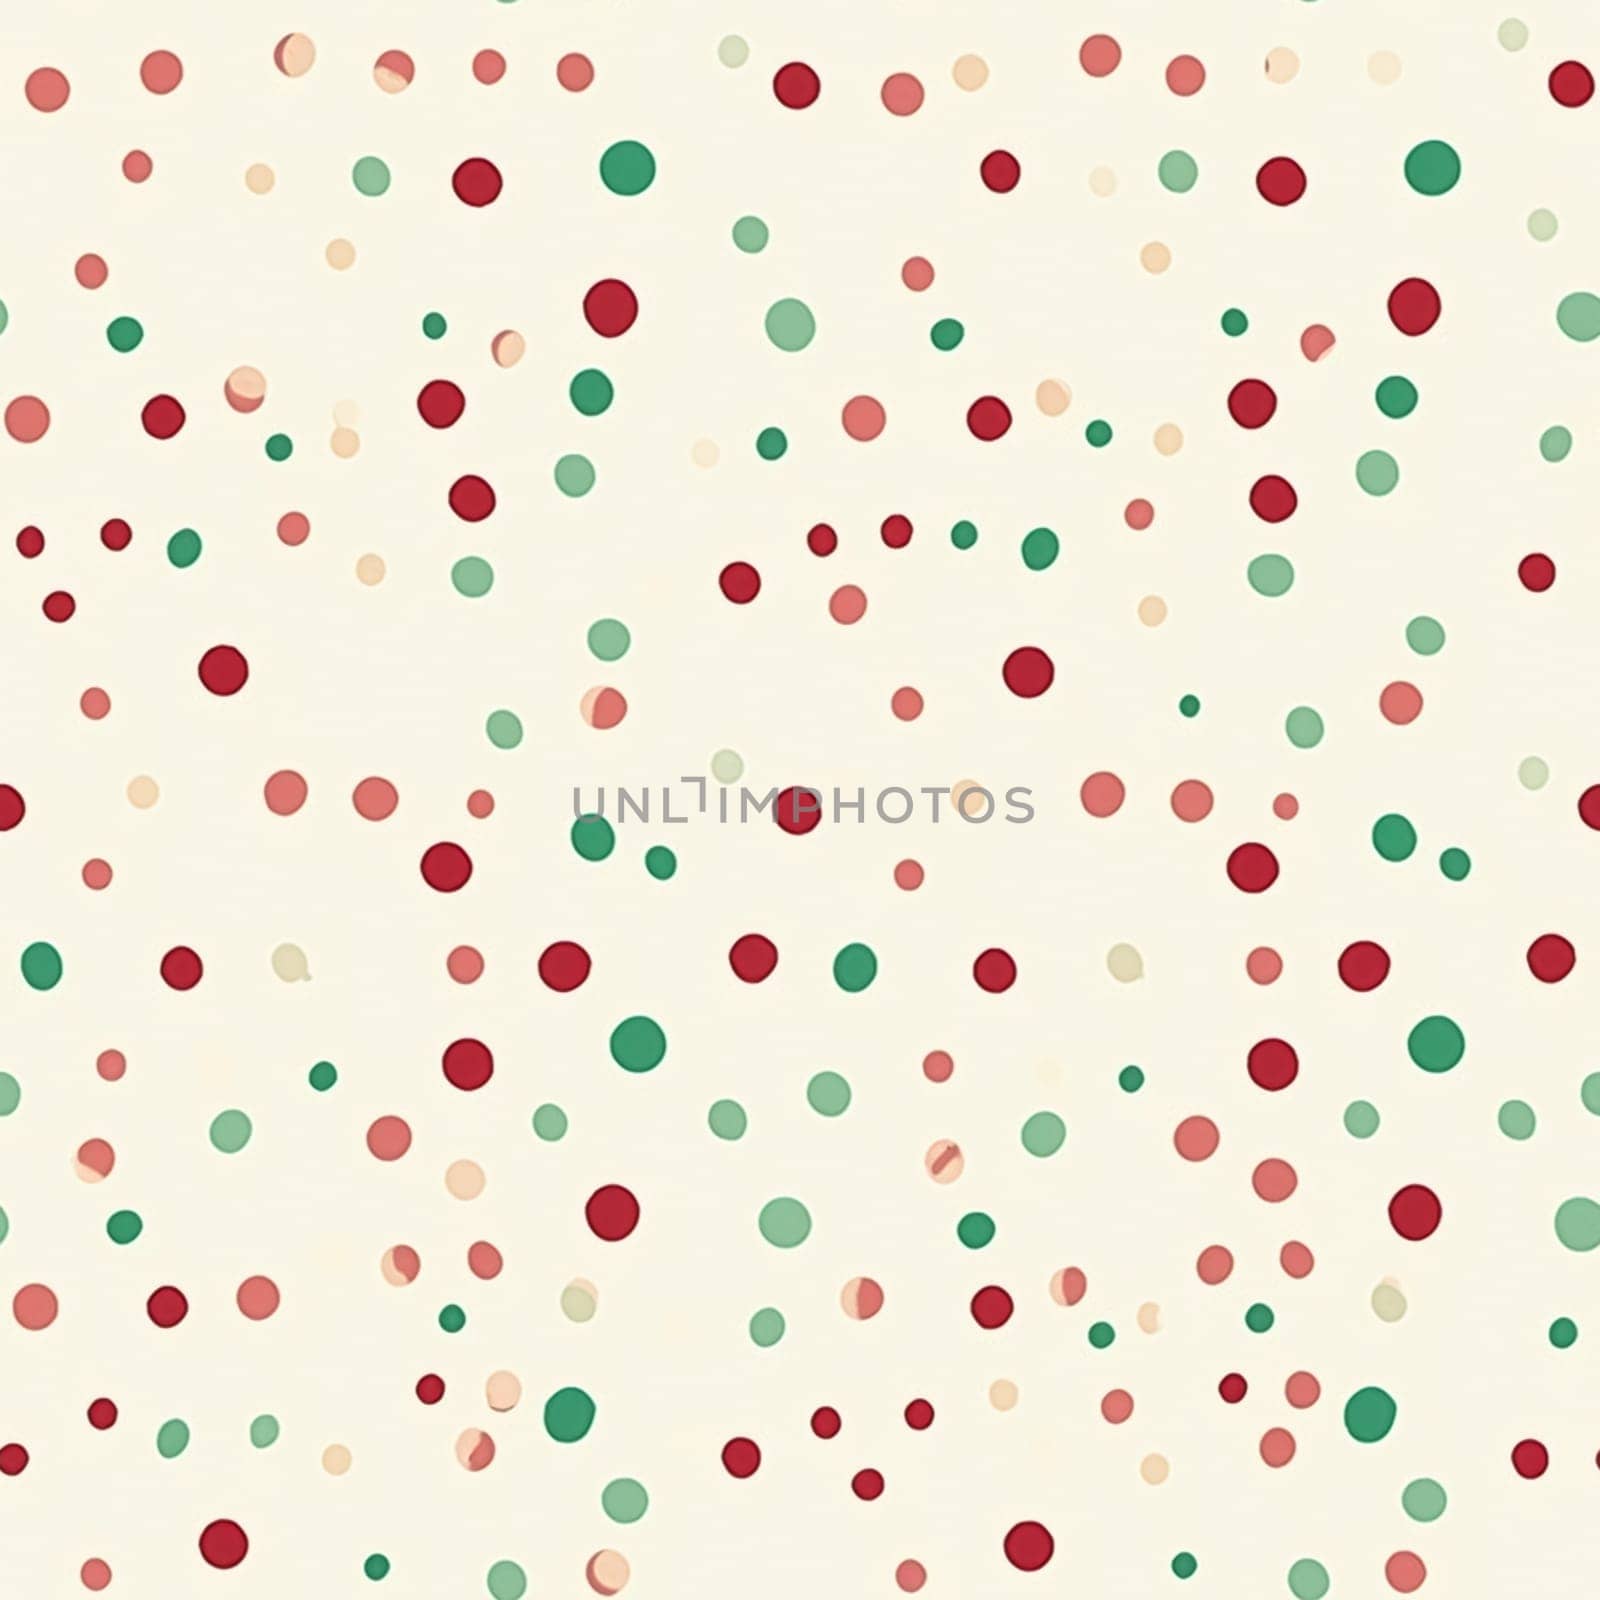 Seamless pattern, tileable polka dot country style print for minimal dotted wallpaper, wrapping paper, scrapbook, fabric and dots product design idea